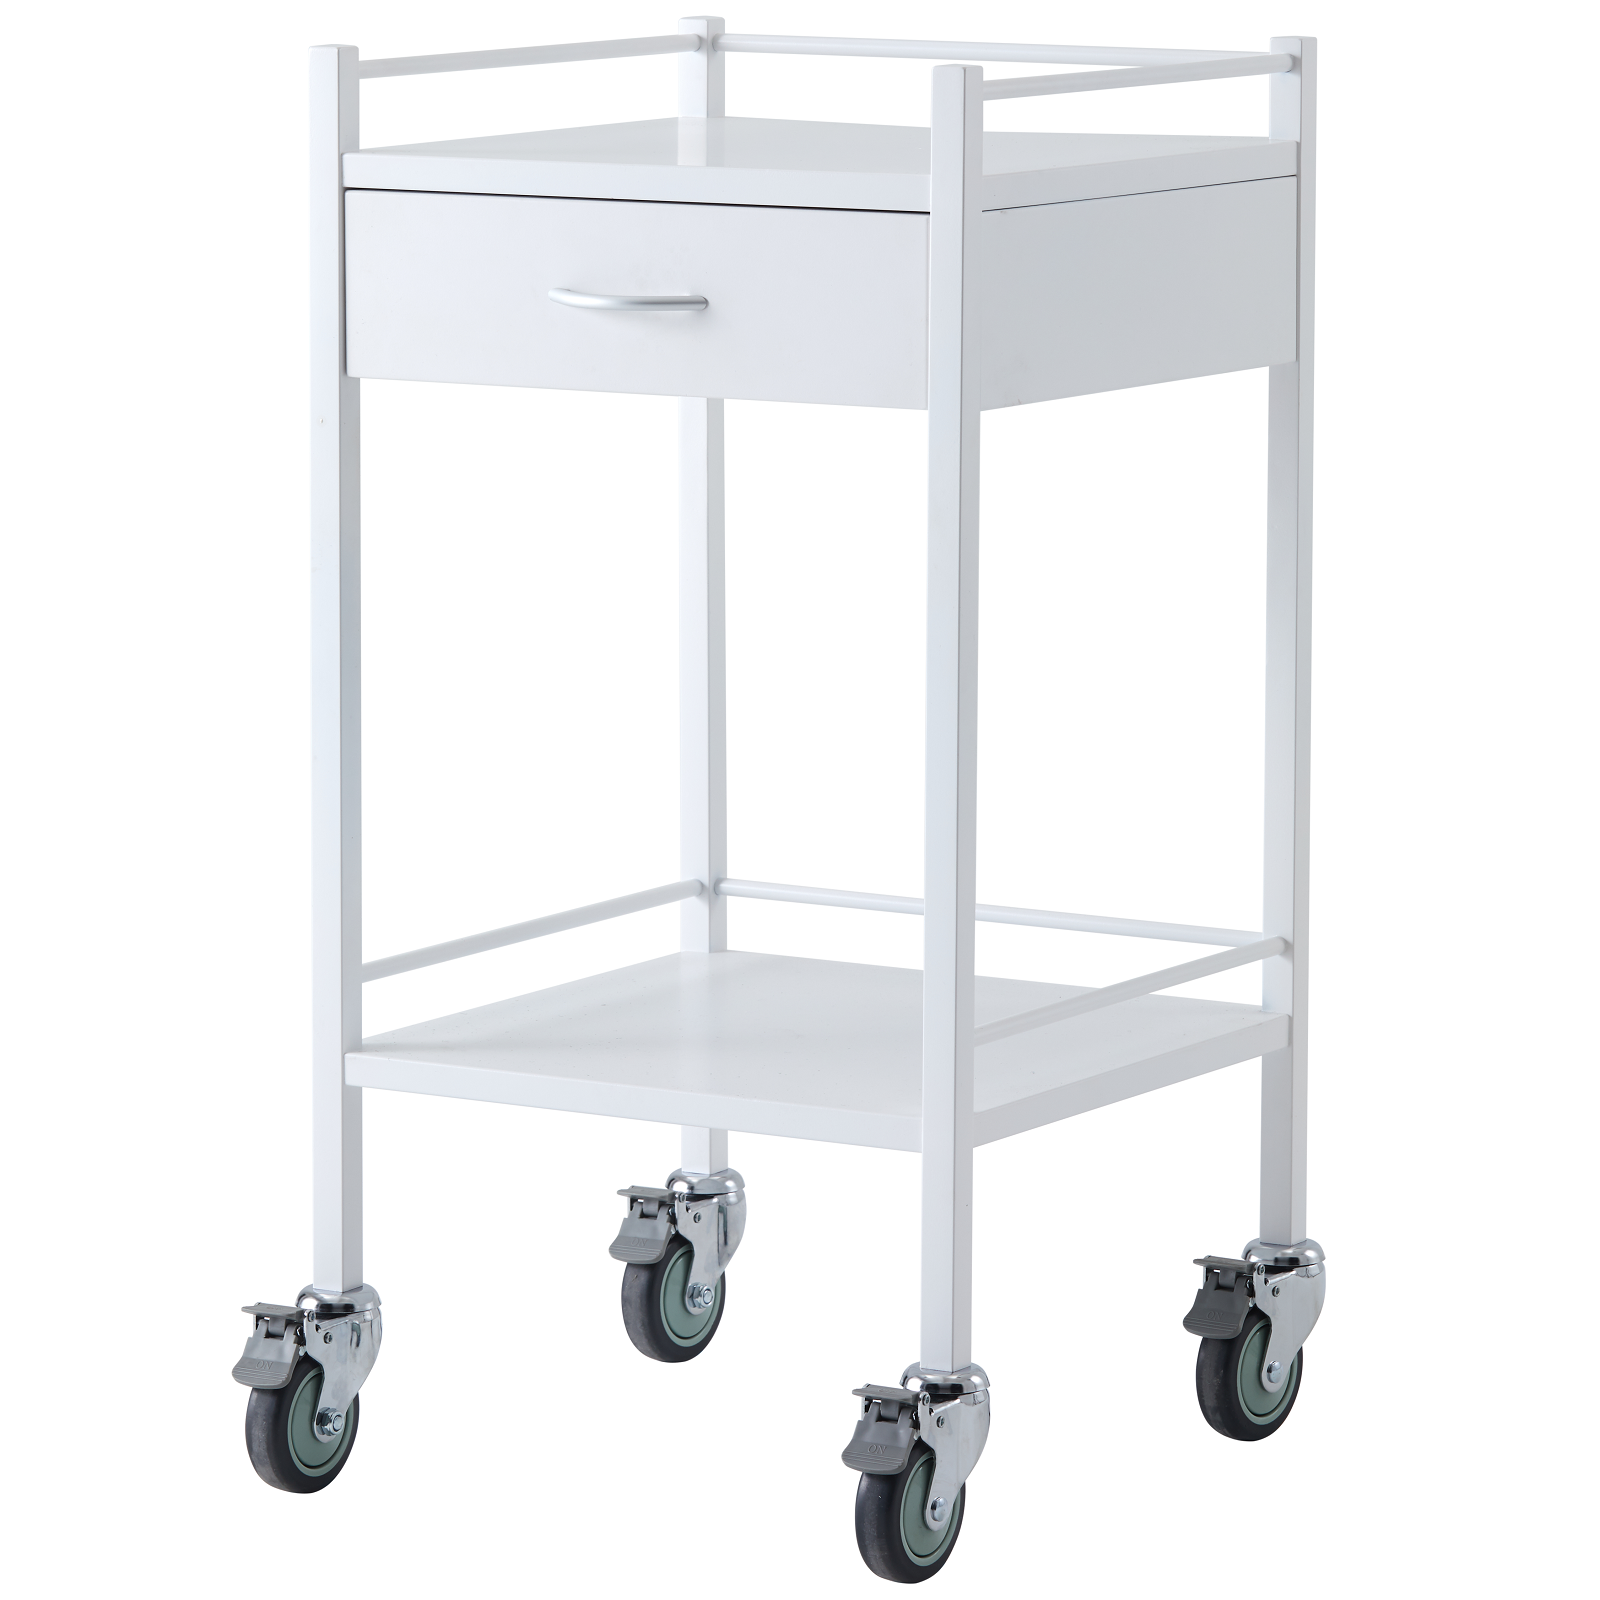 With smooth castors and an outstanding finish our single drawer powder coated trolley is a great alternative to stainless.